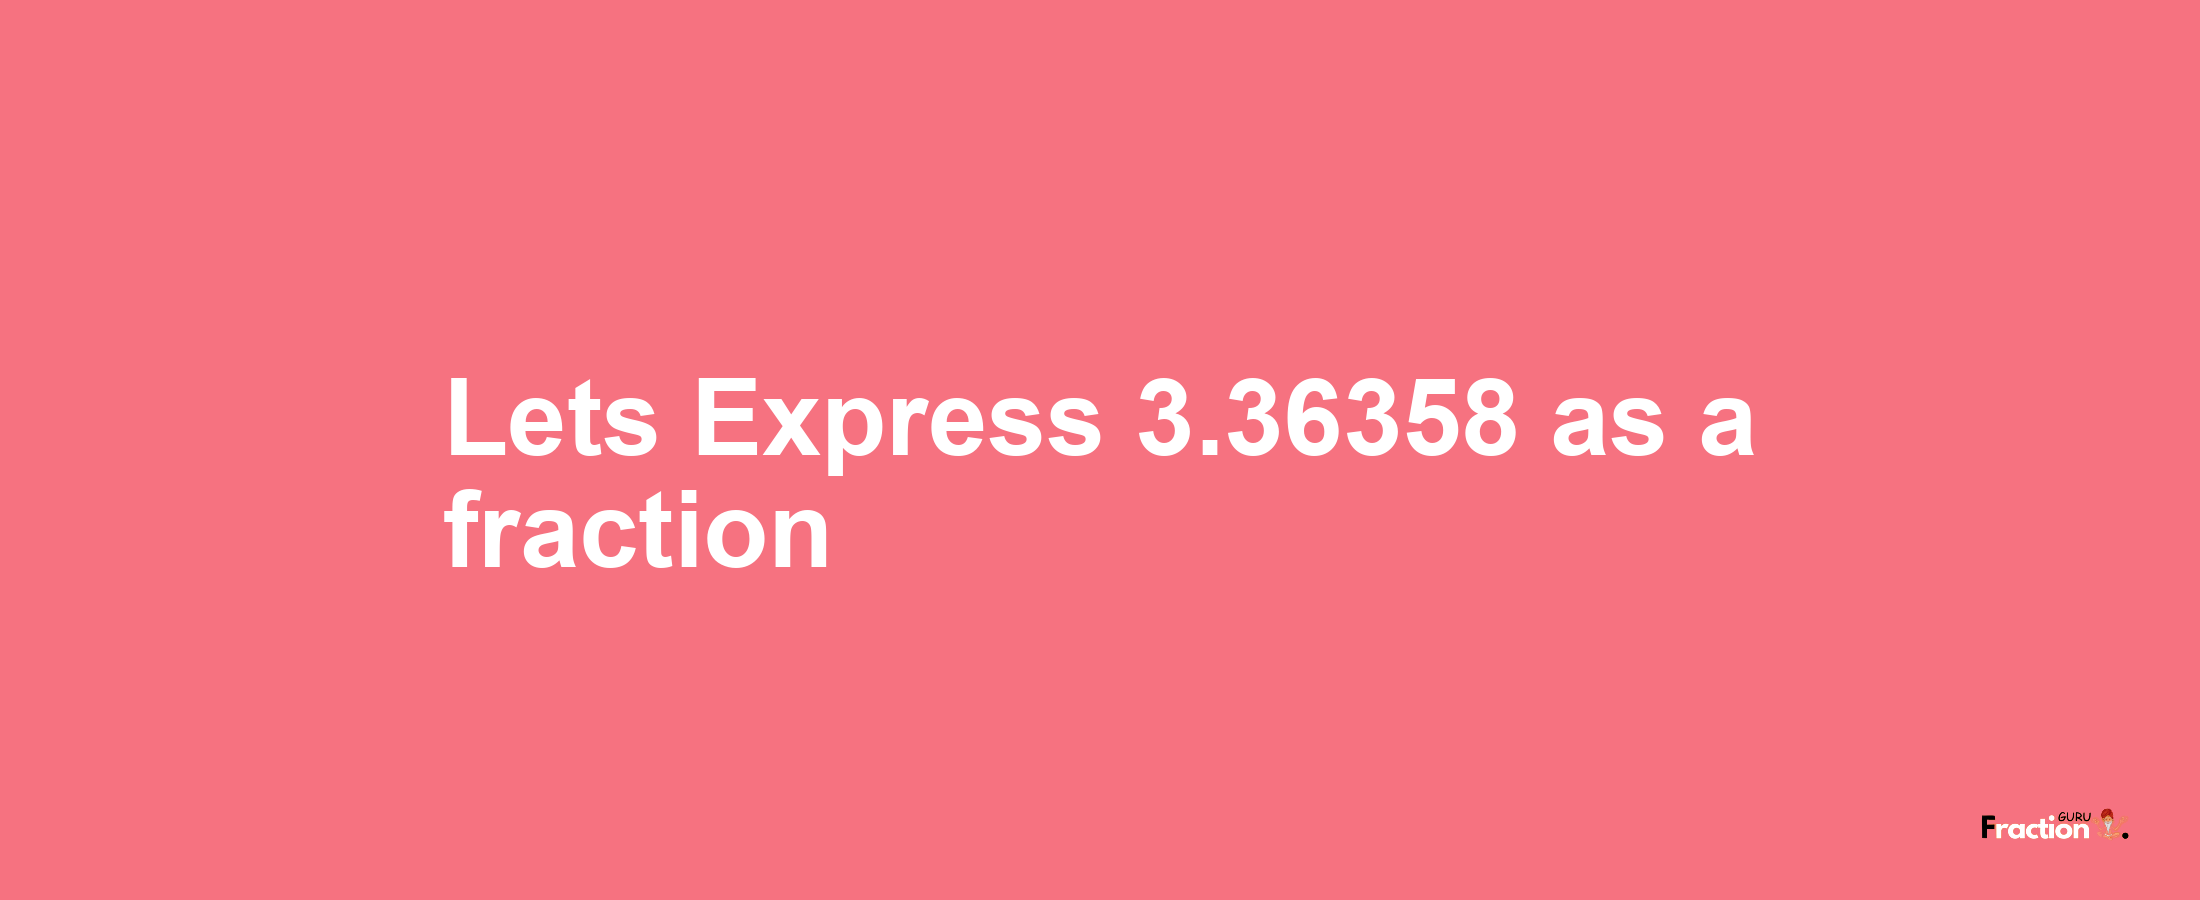 Lets Express 3.36358 as afraction